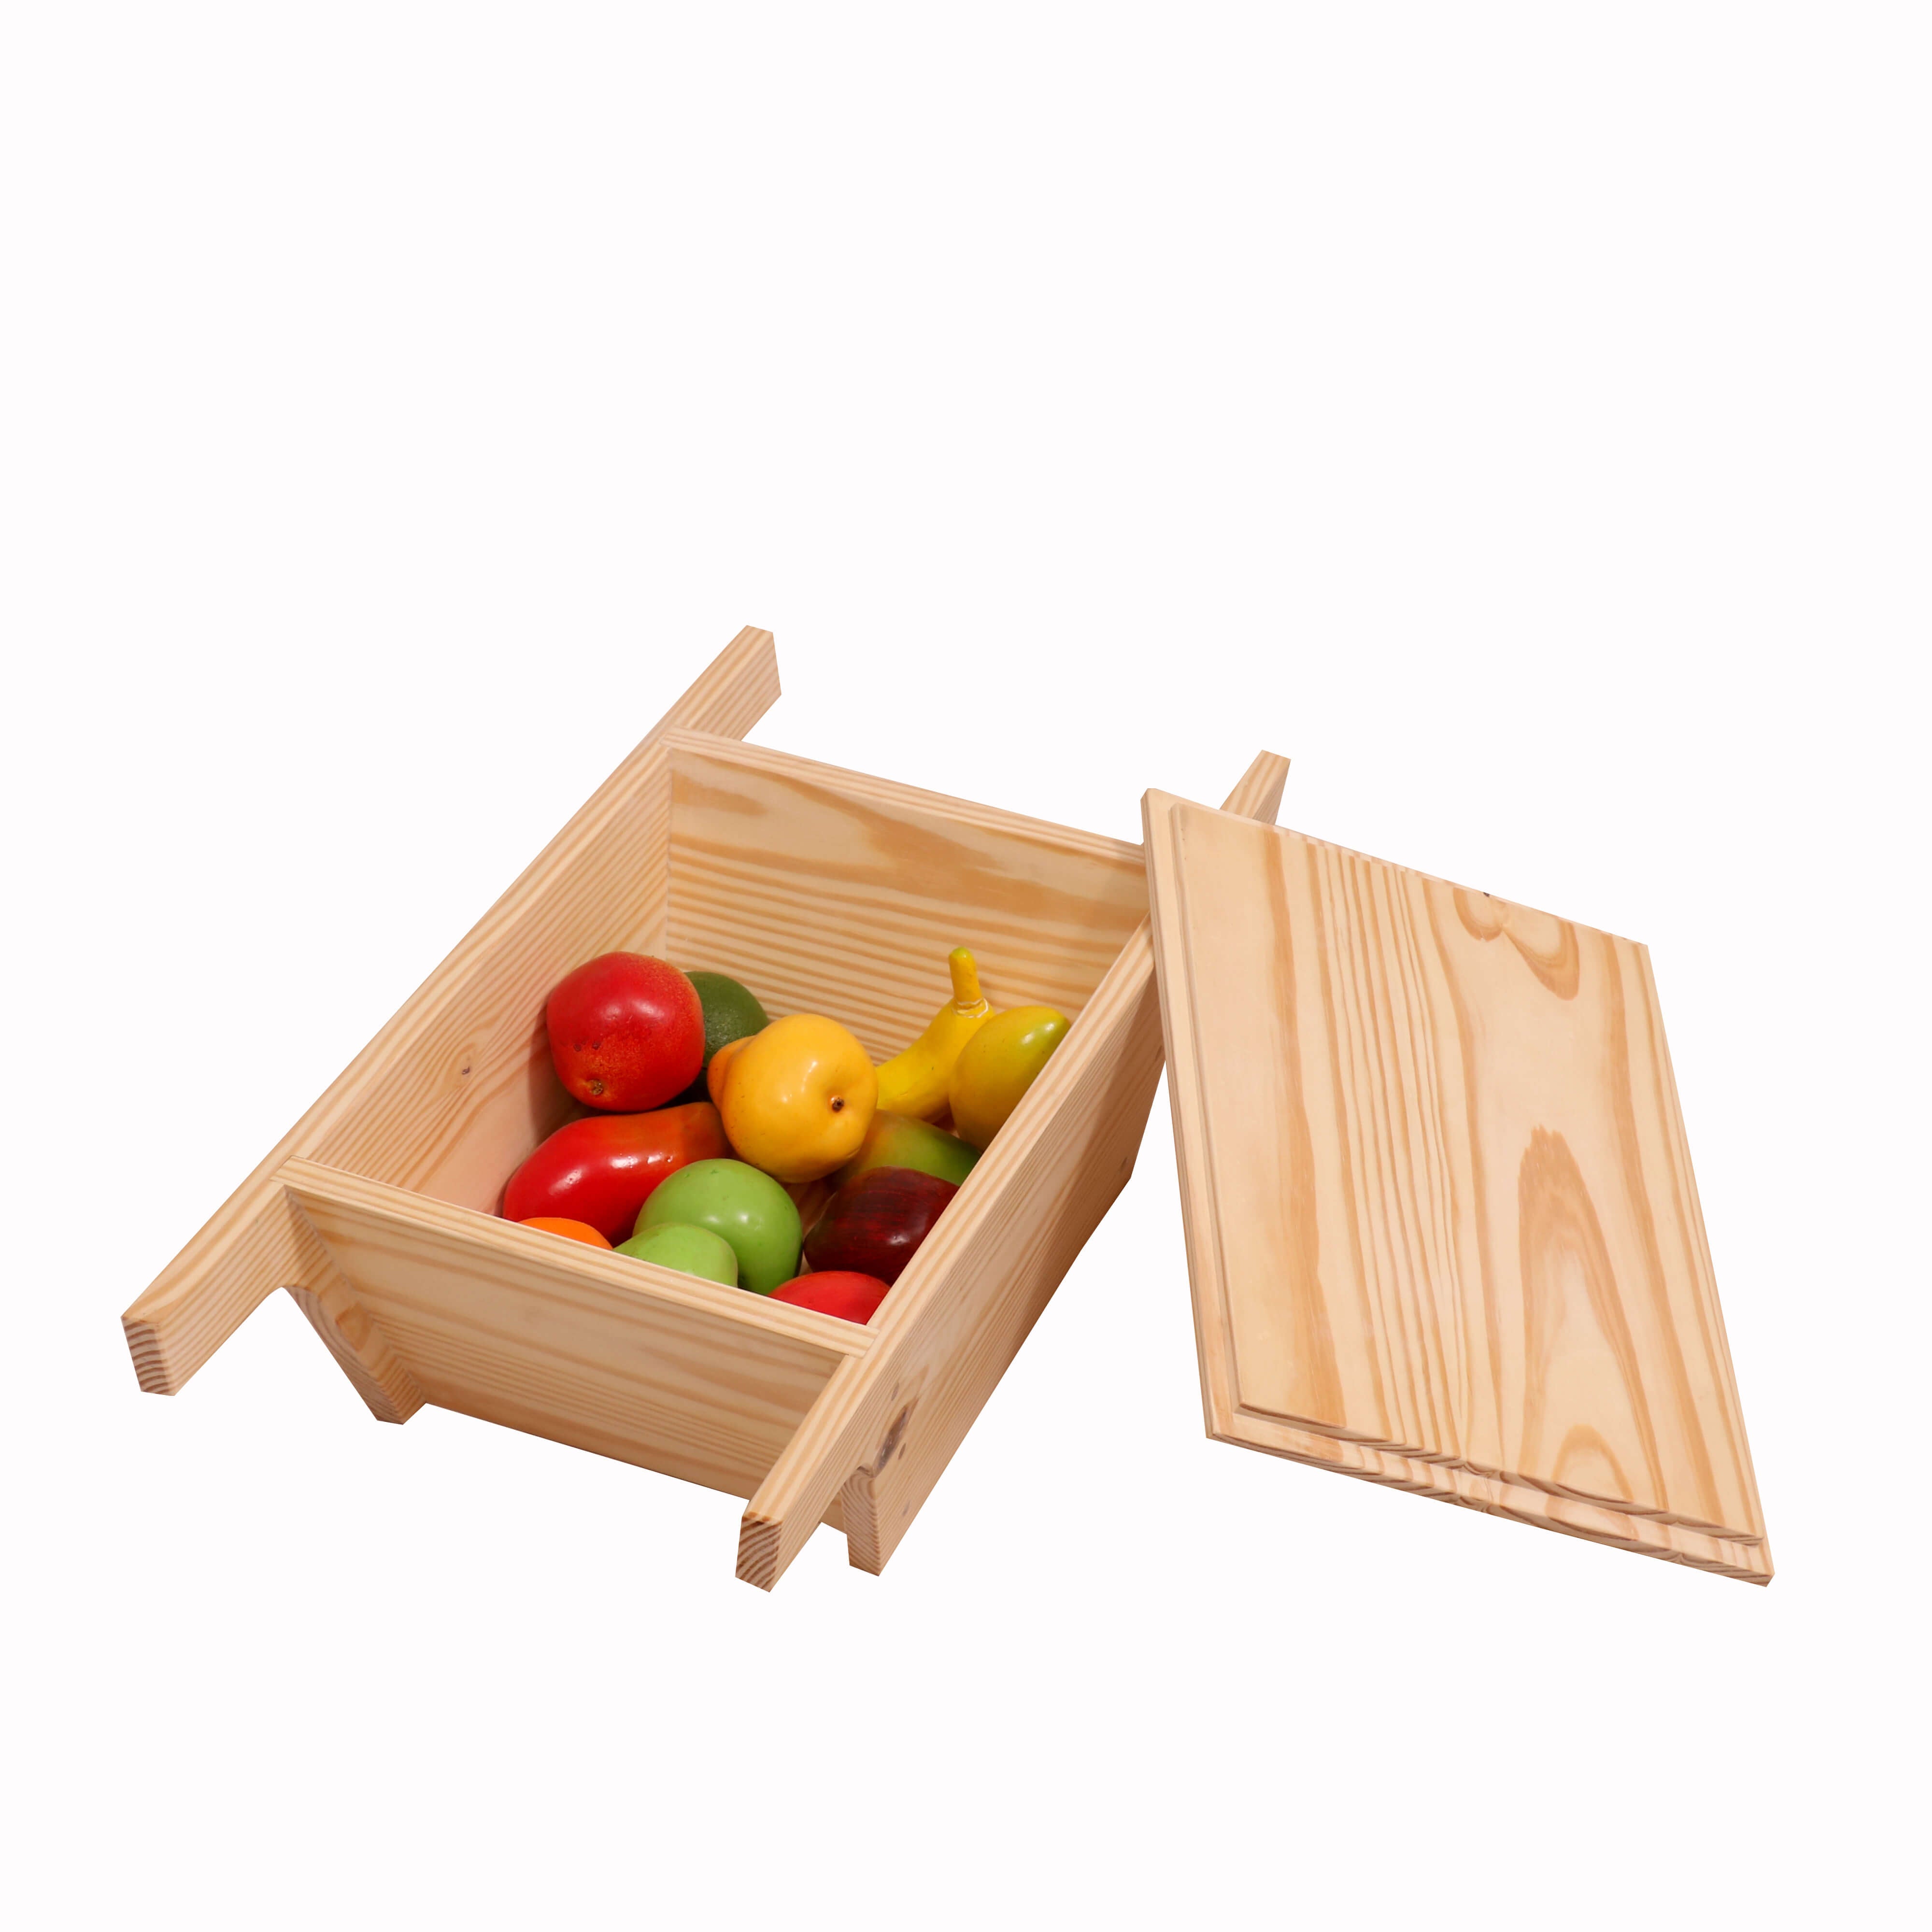 Boat Shaped Wooden Crate Crate